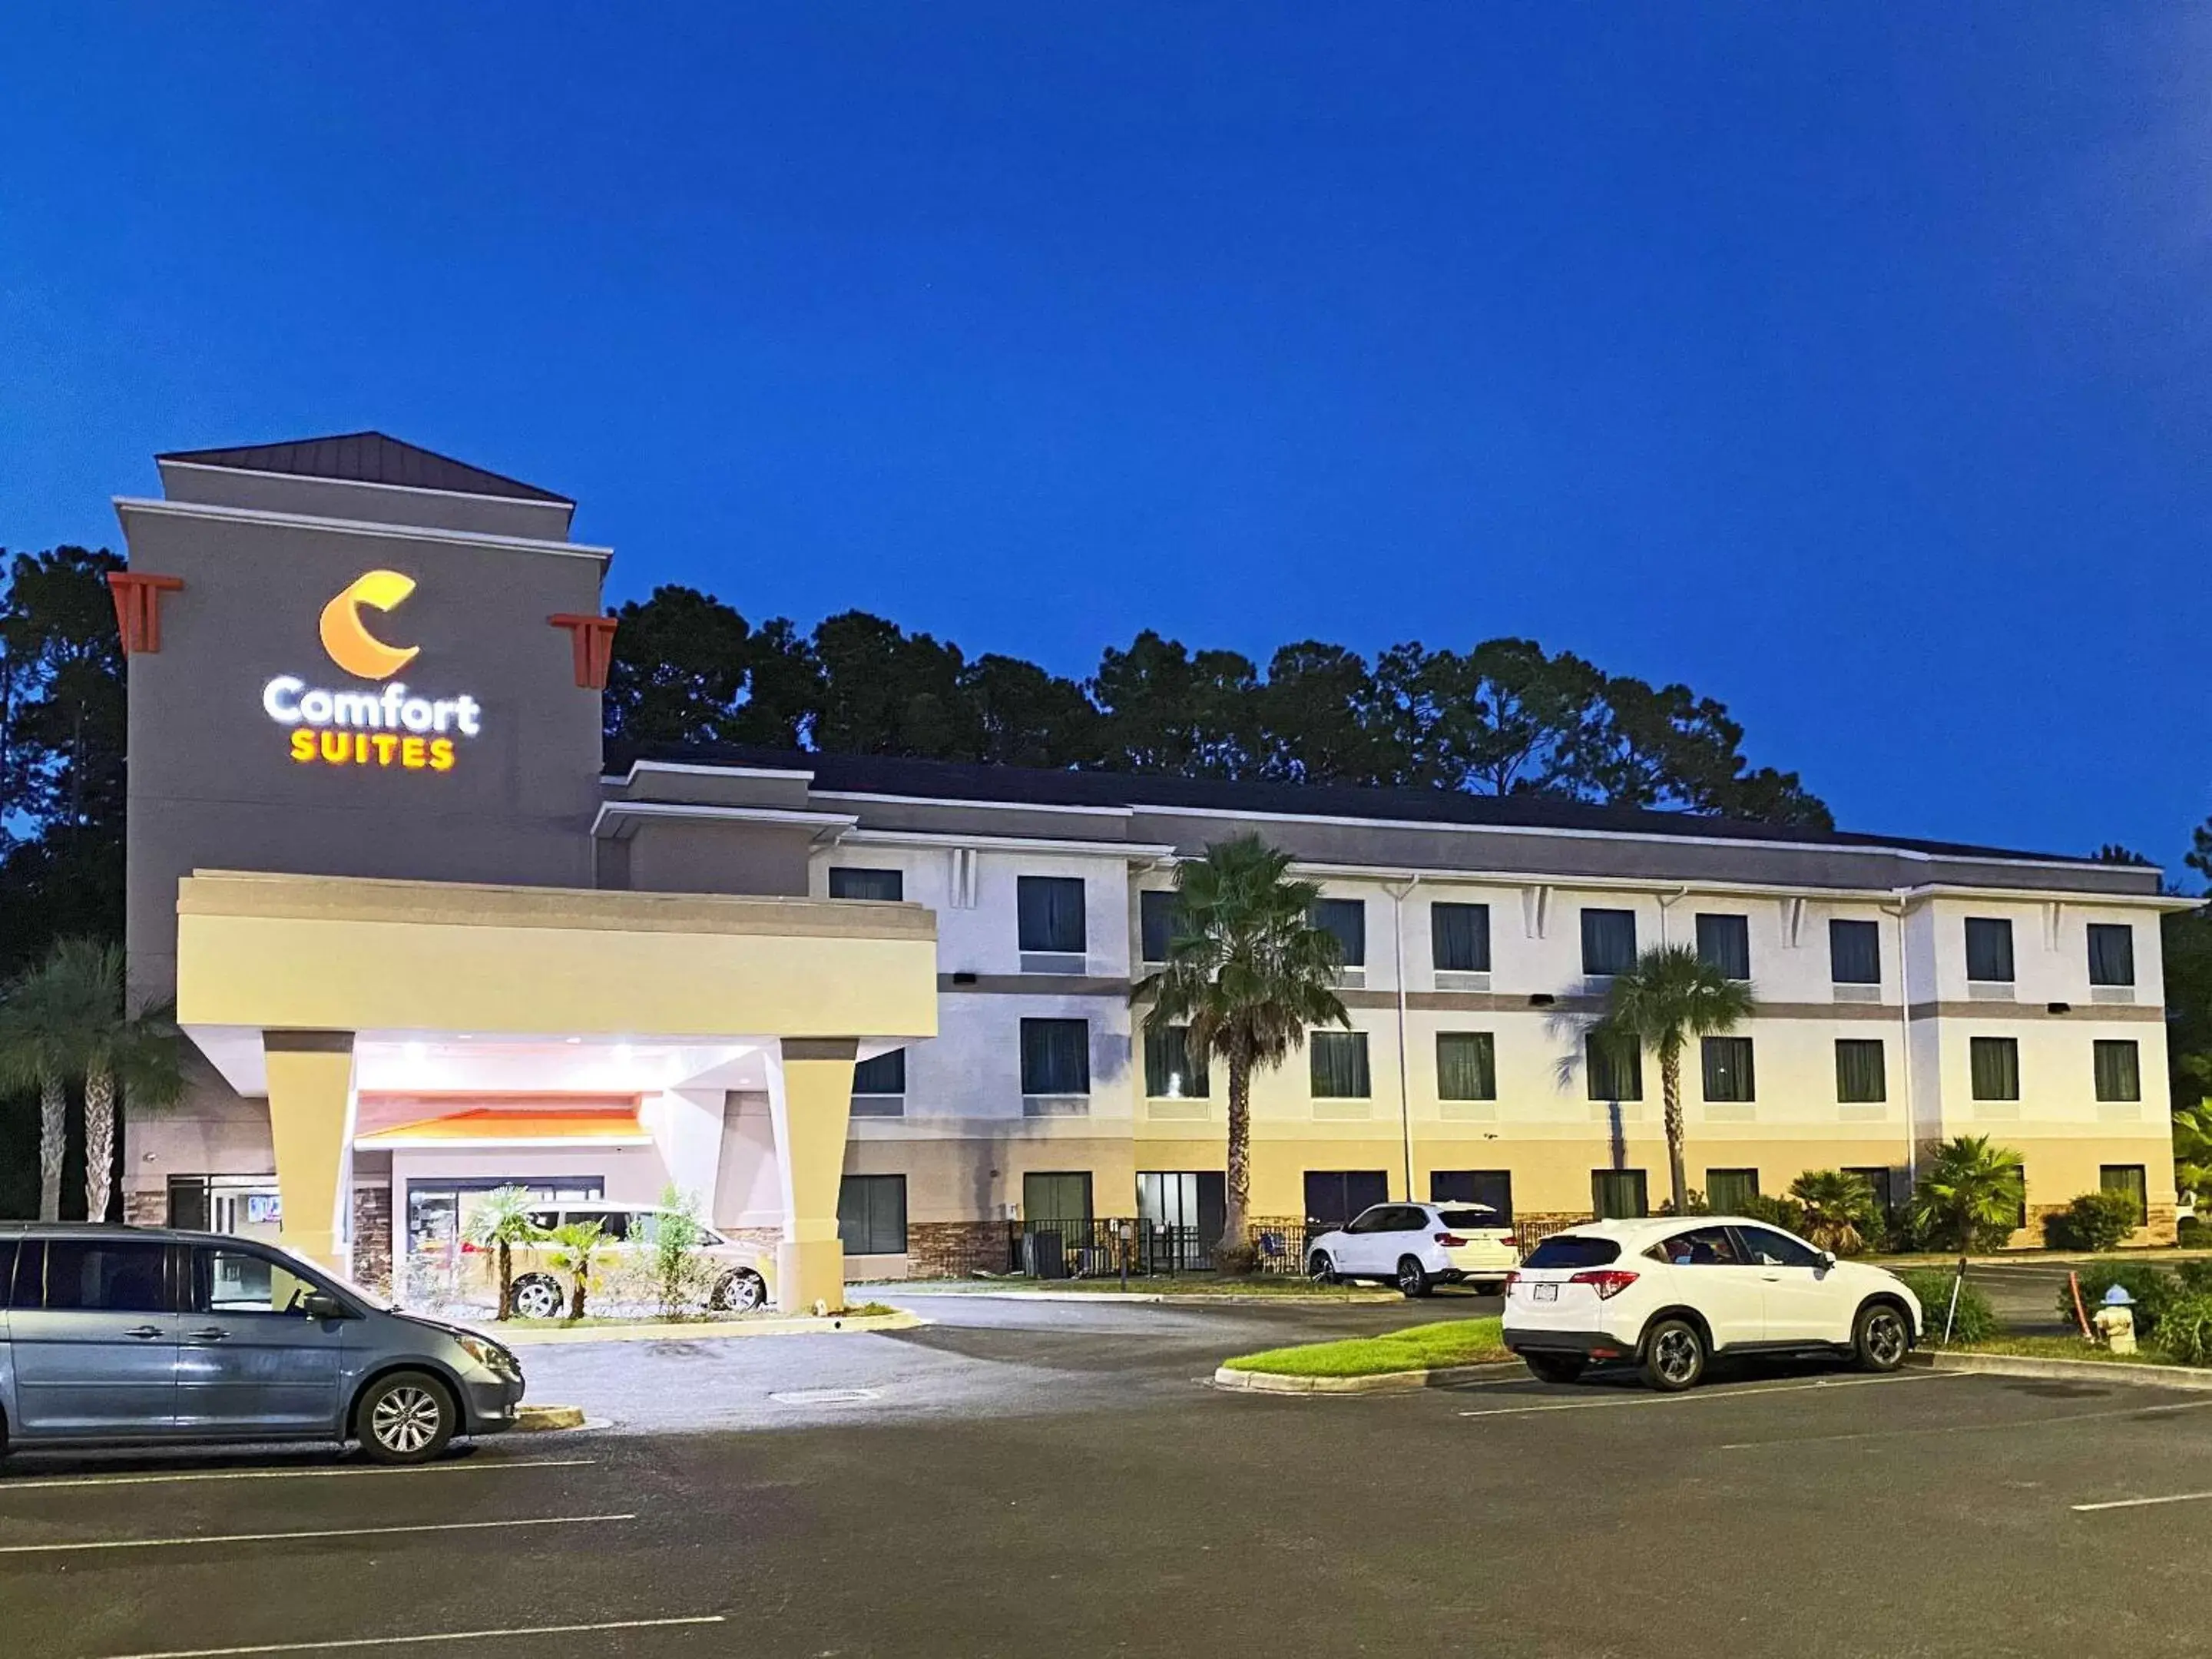 Property Building in Comfort Suites by Choice Hotels, Kingsland, I-95, Kings Bay Naval Base